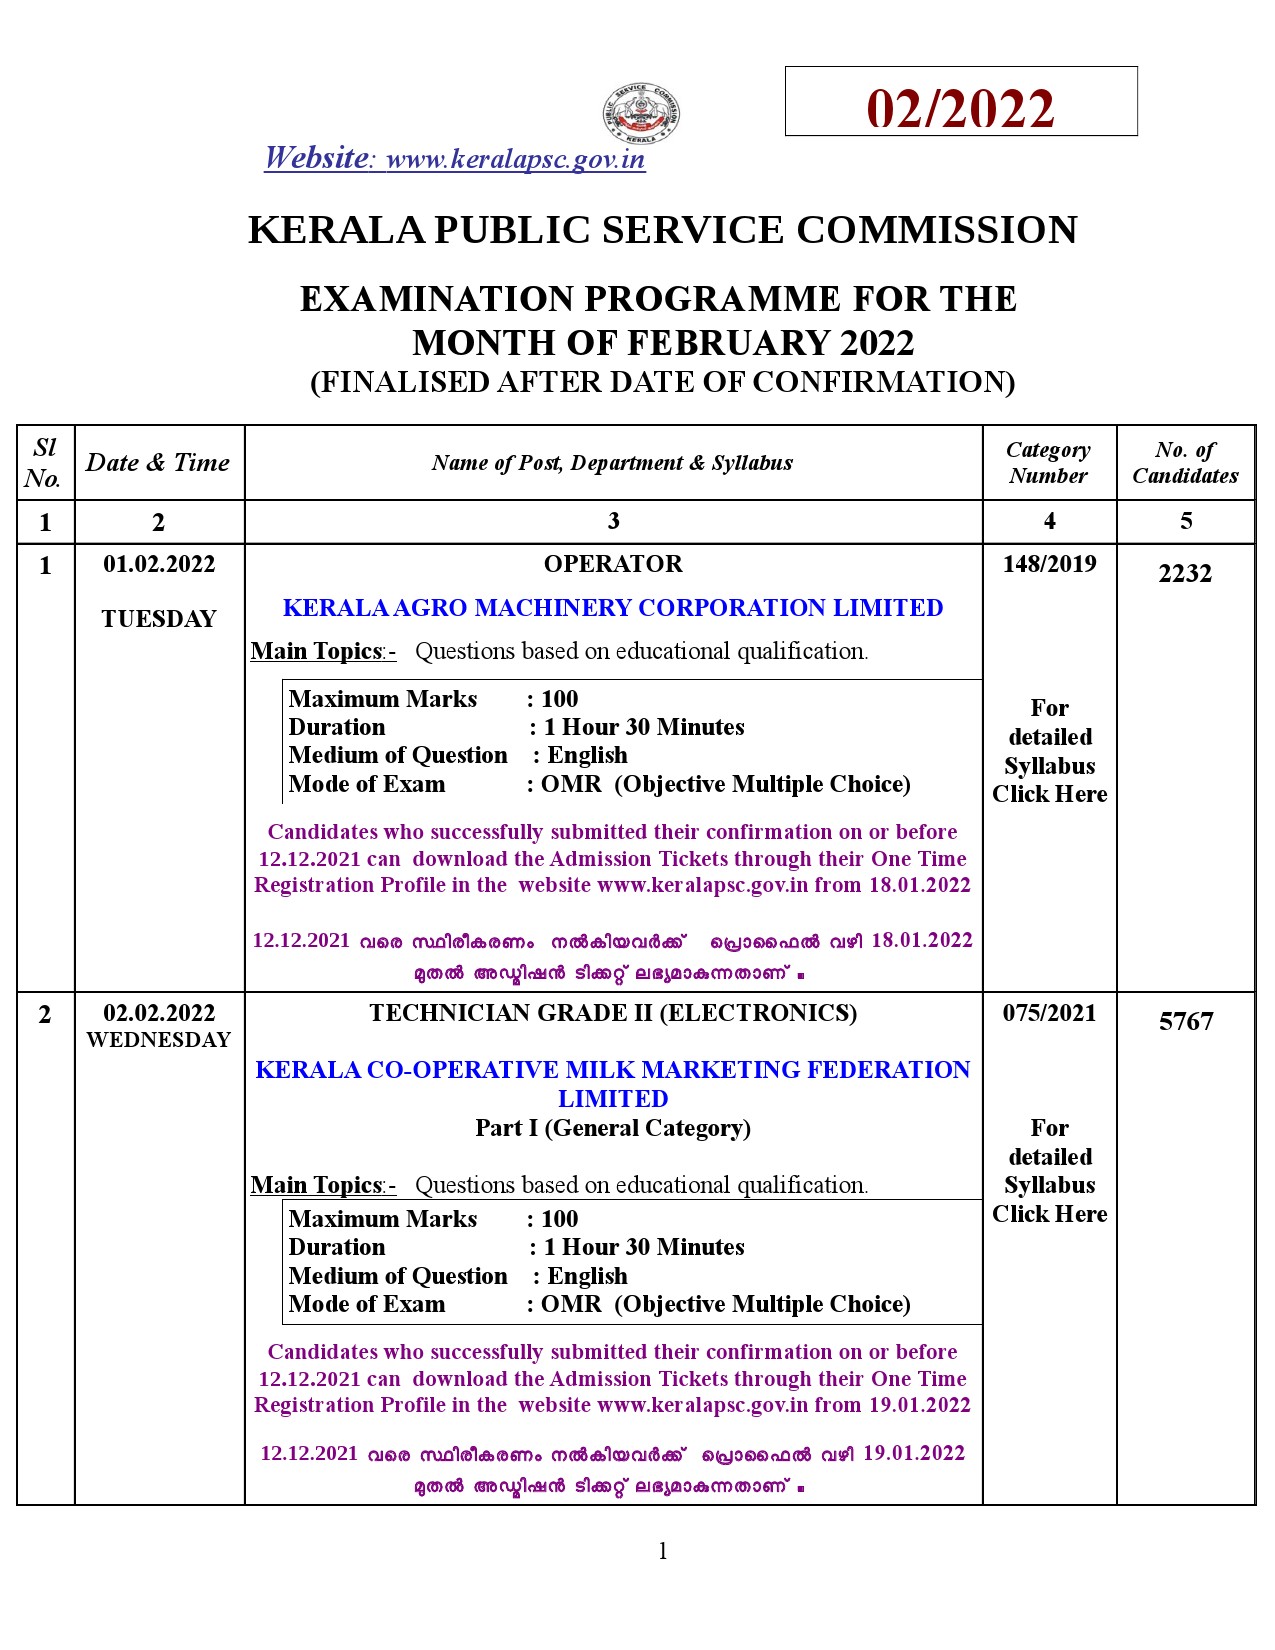 KPSC EXAMINATION PROGRAMME FOR THE MONTH OF FEBRUARY 2022 - Notification Image 1